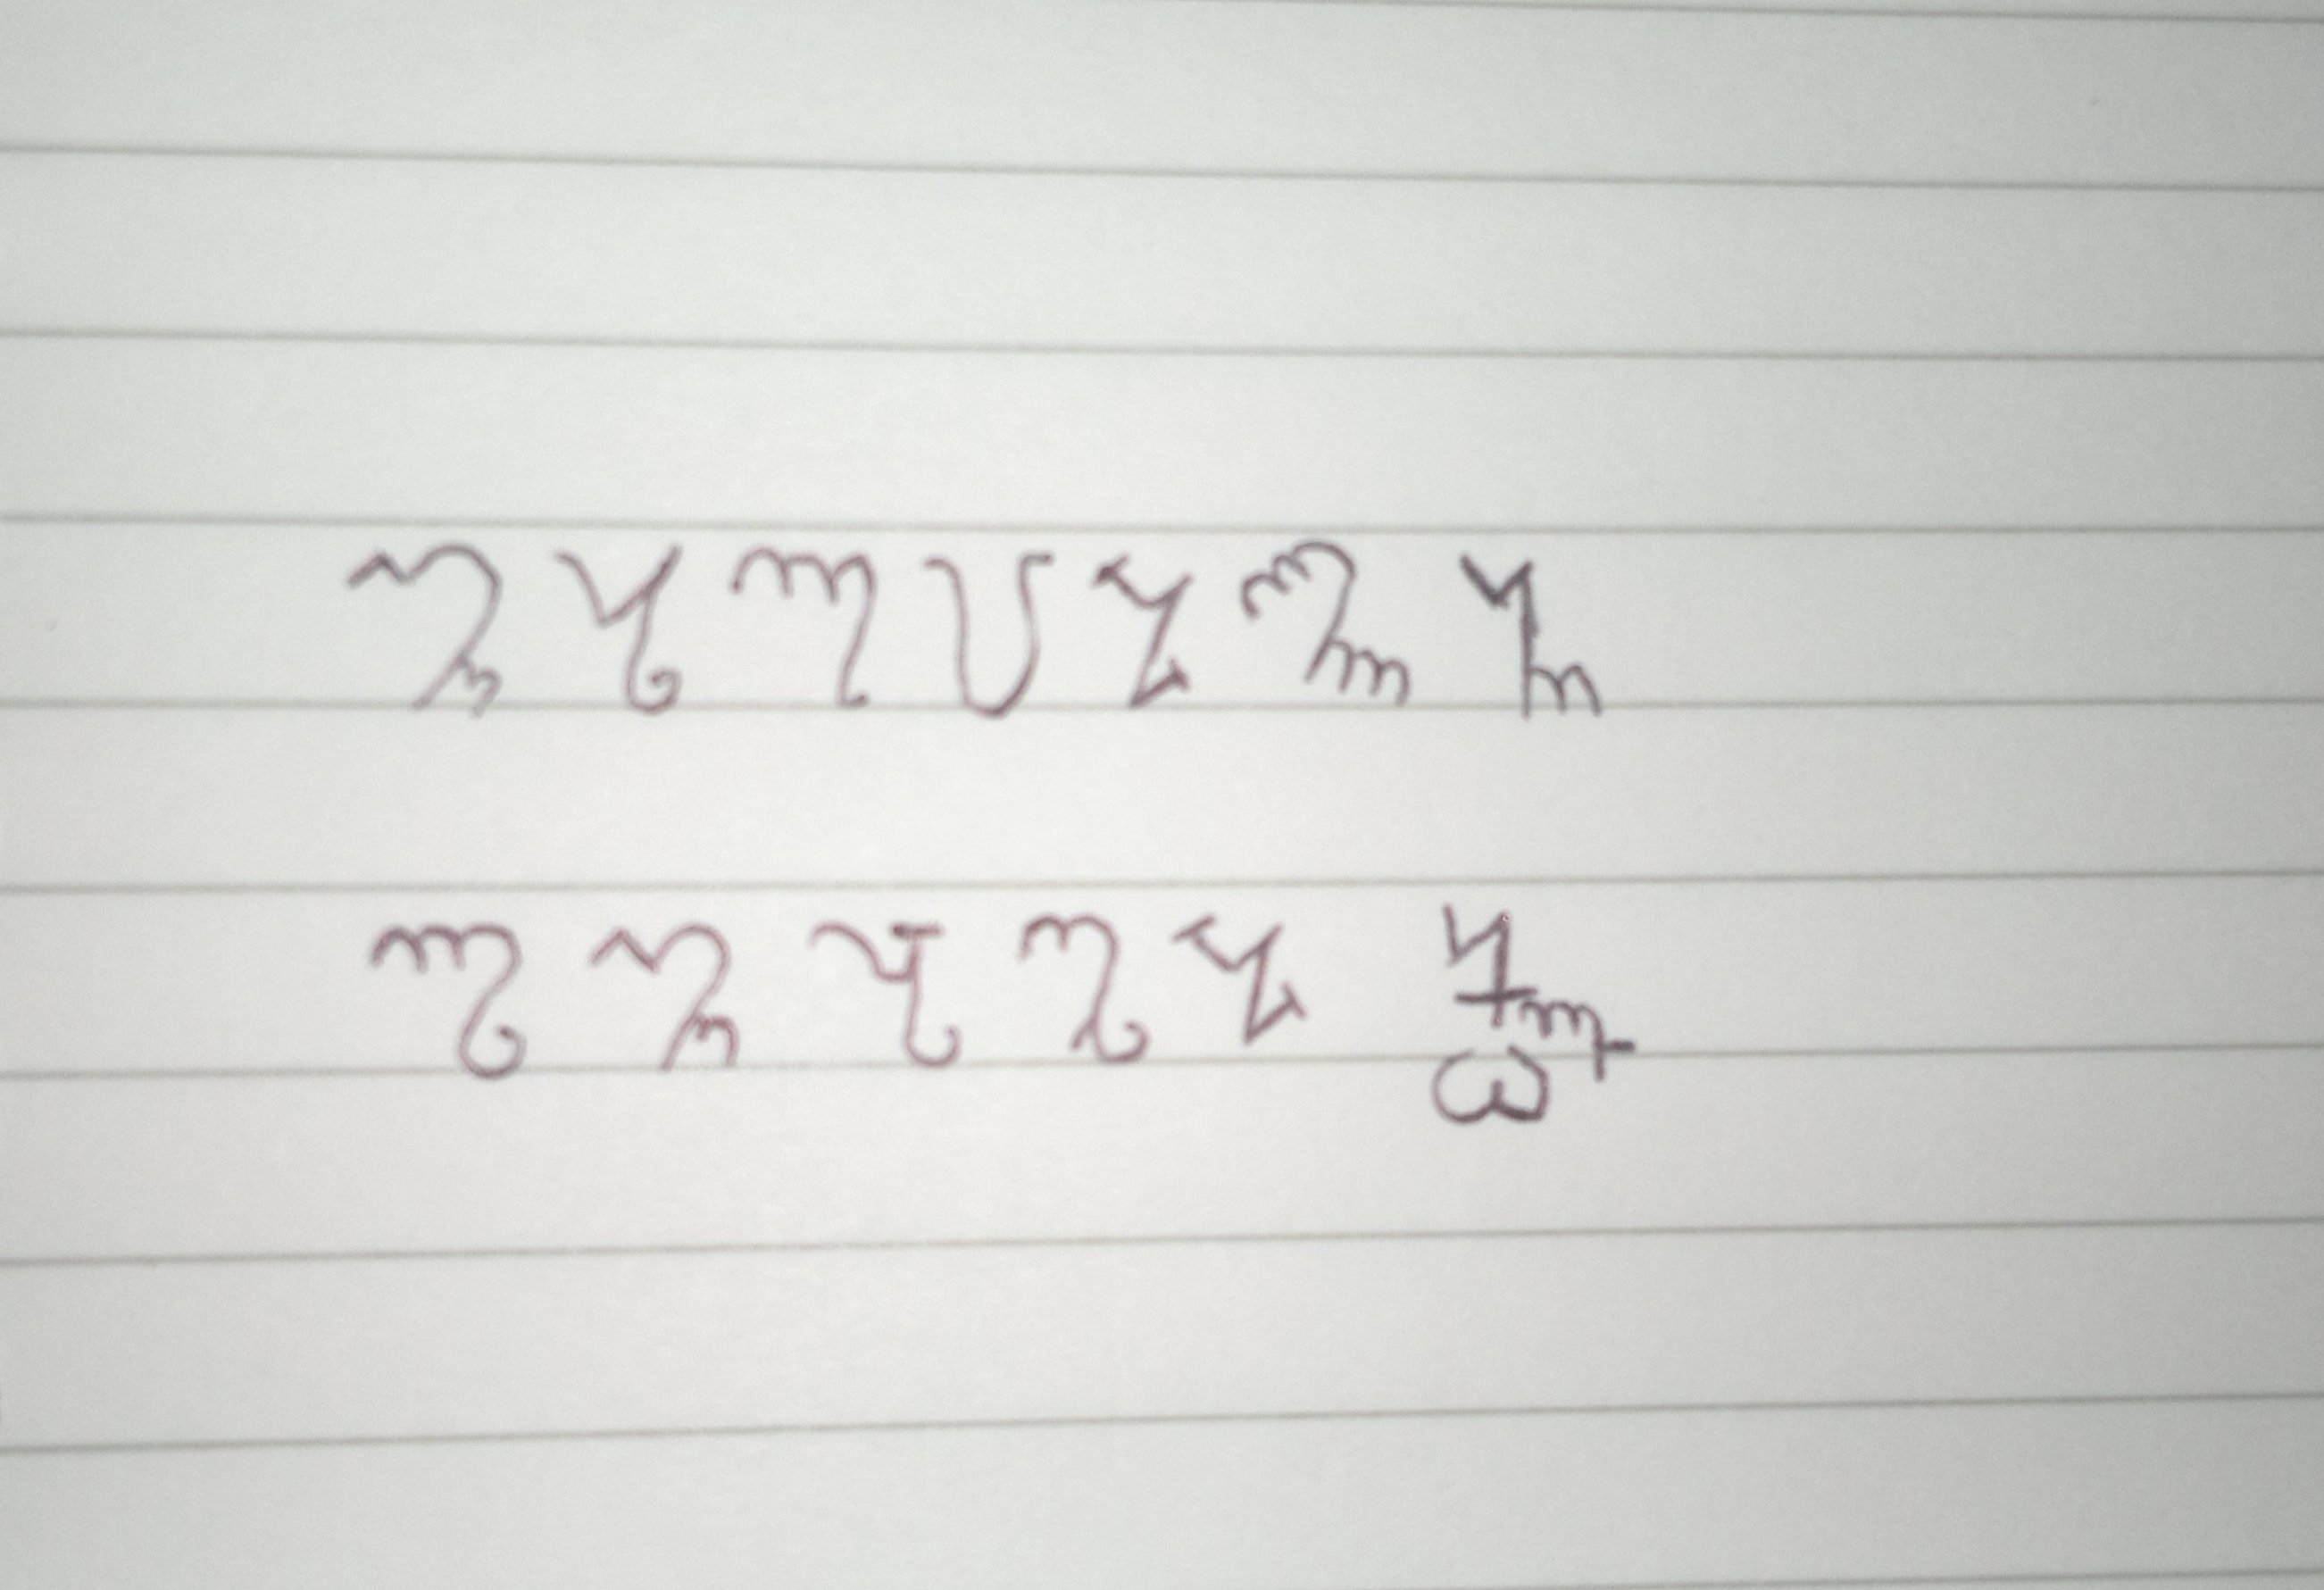 How to write in theban script